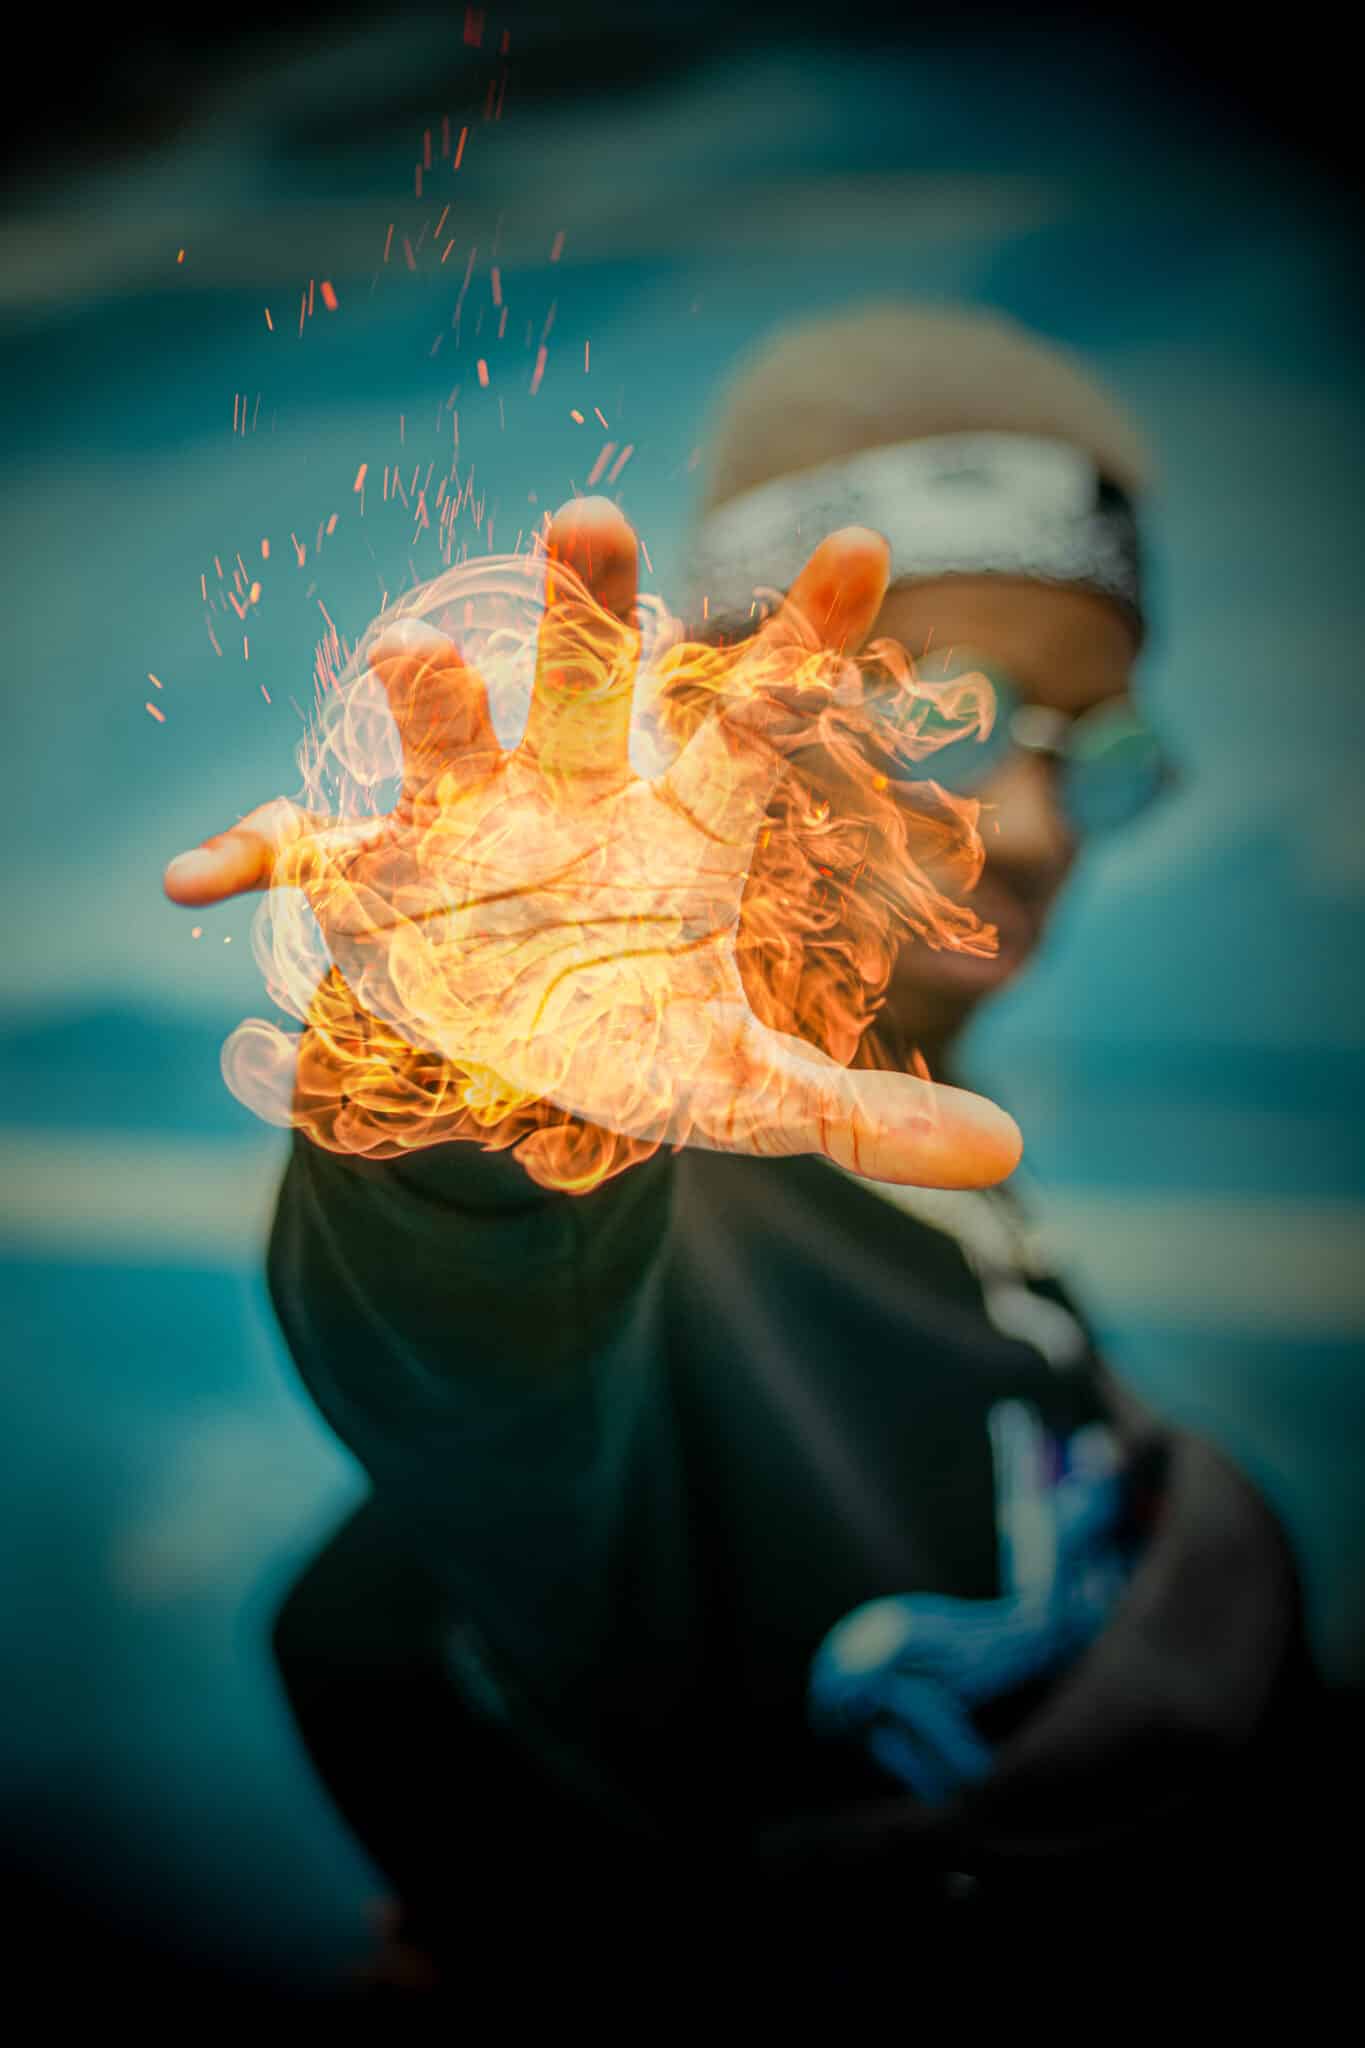 Man with fire in hand